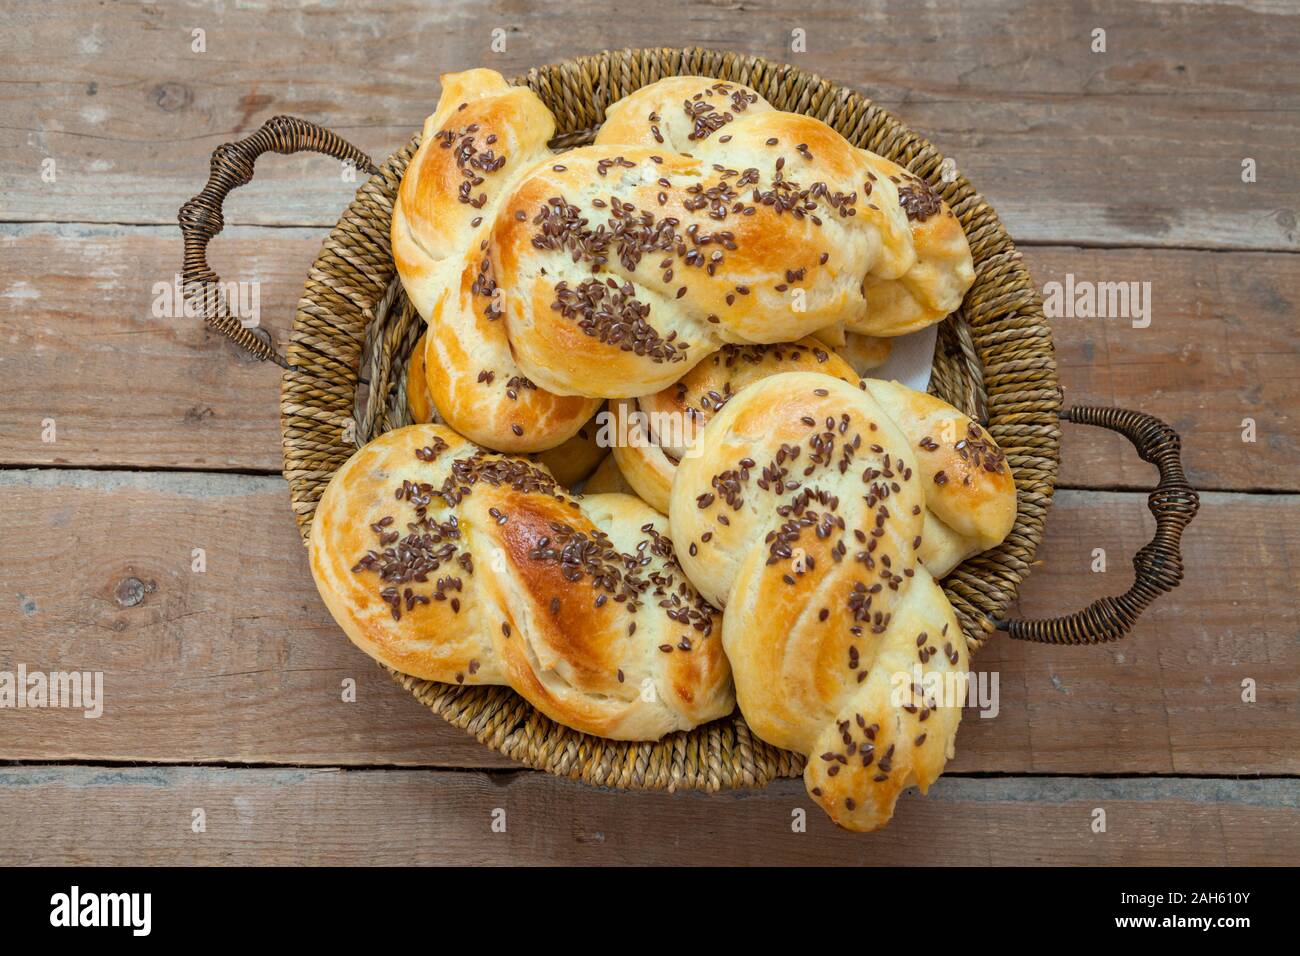 Homemade small bread like snack with linseed Stock Photo